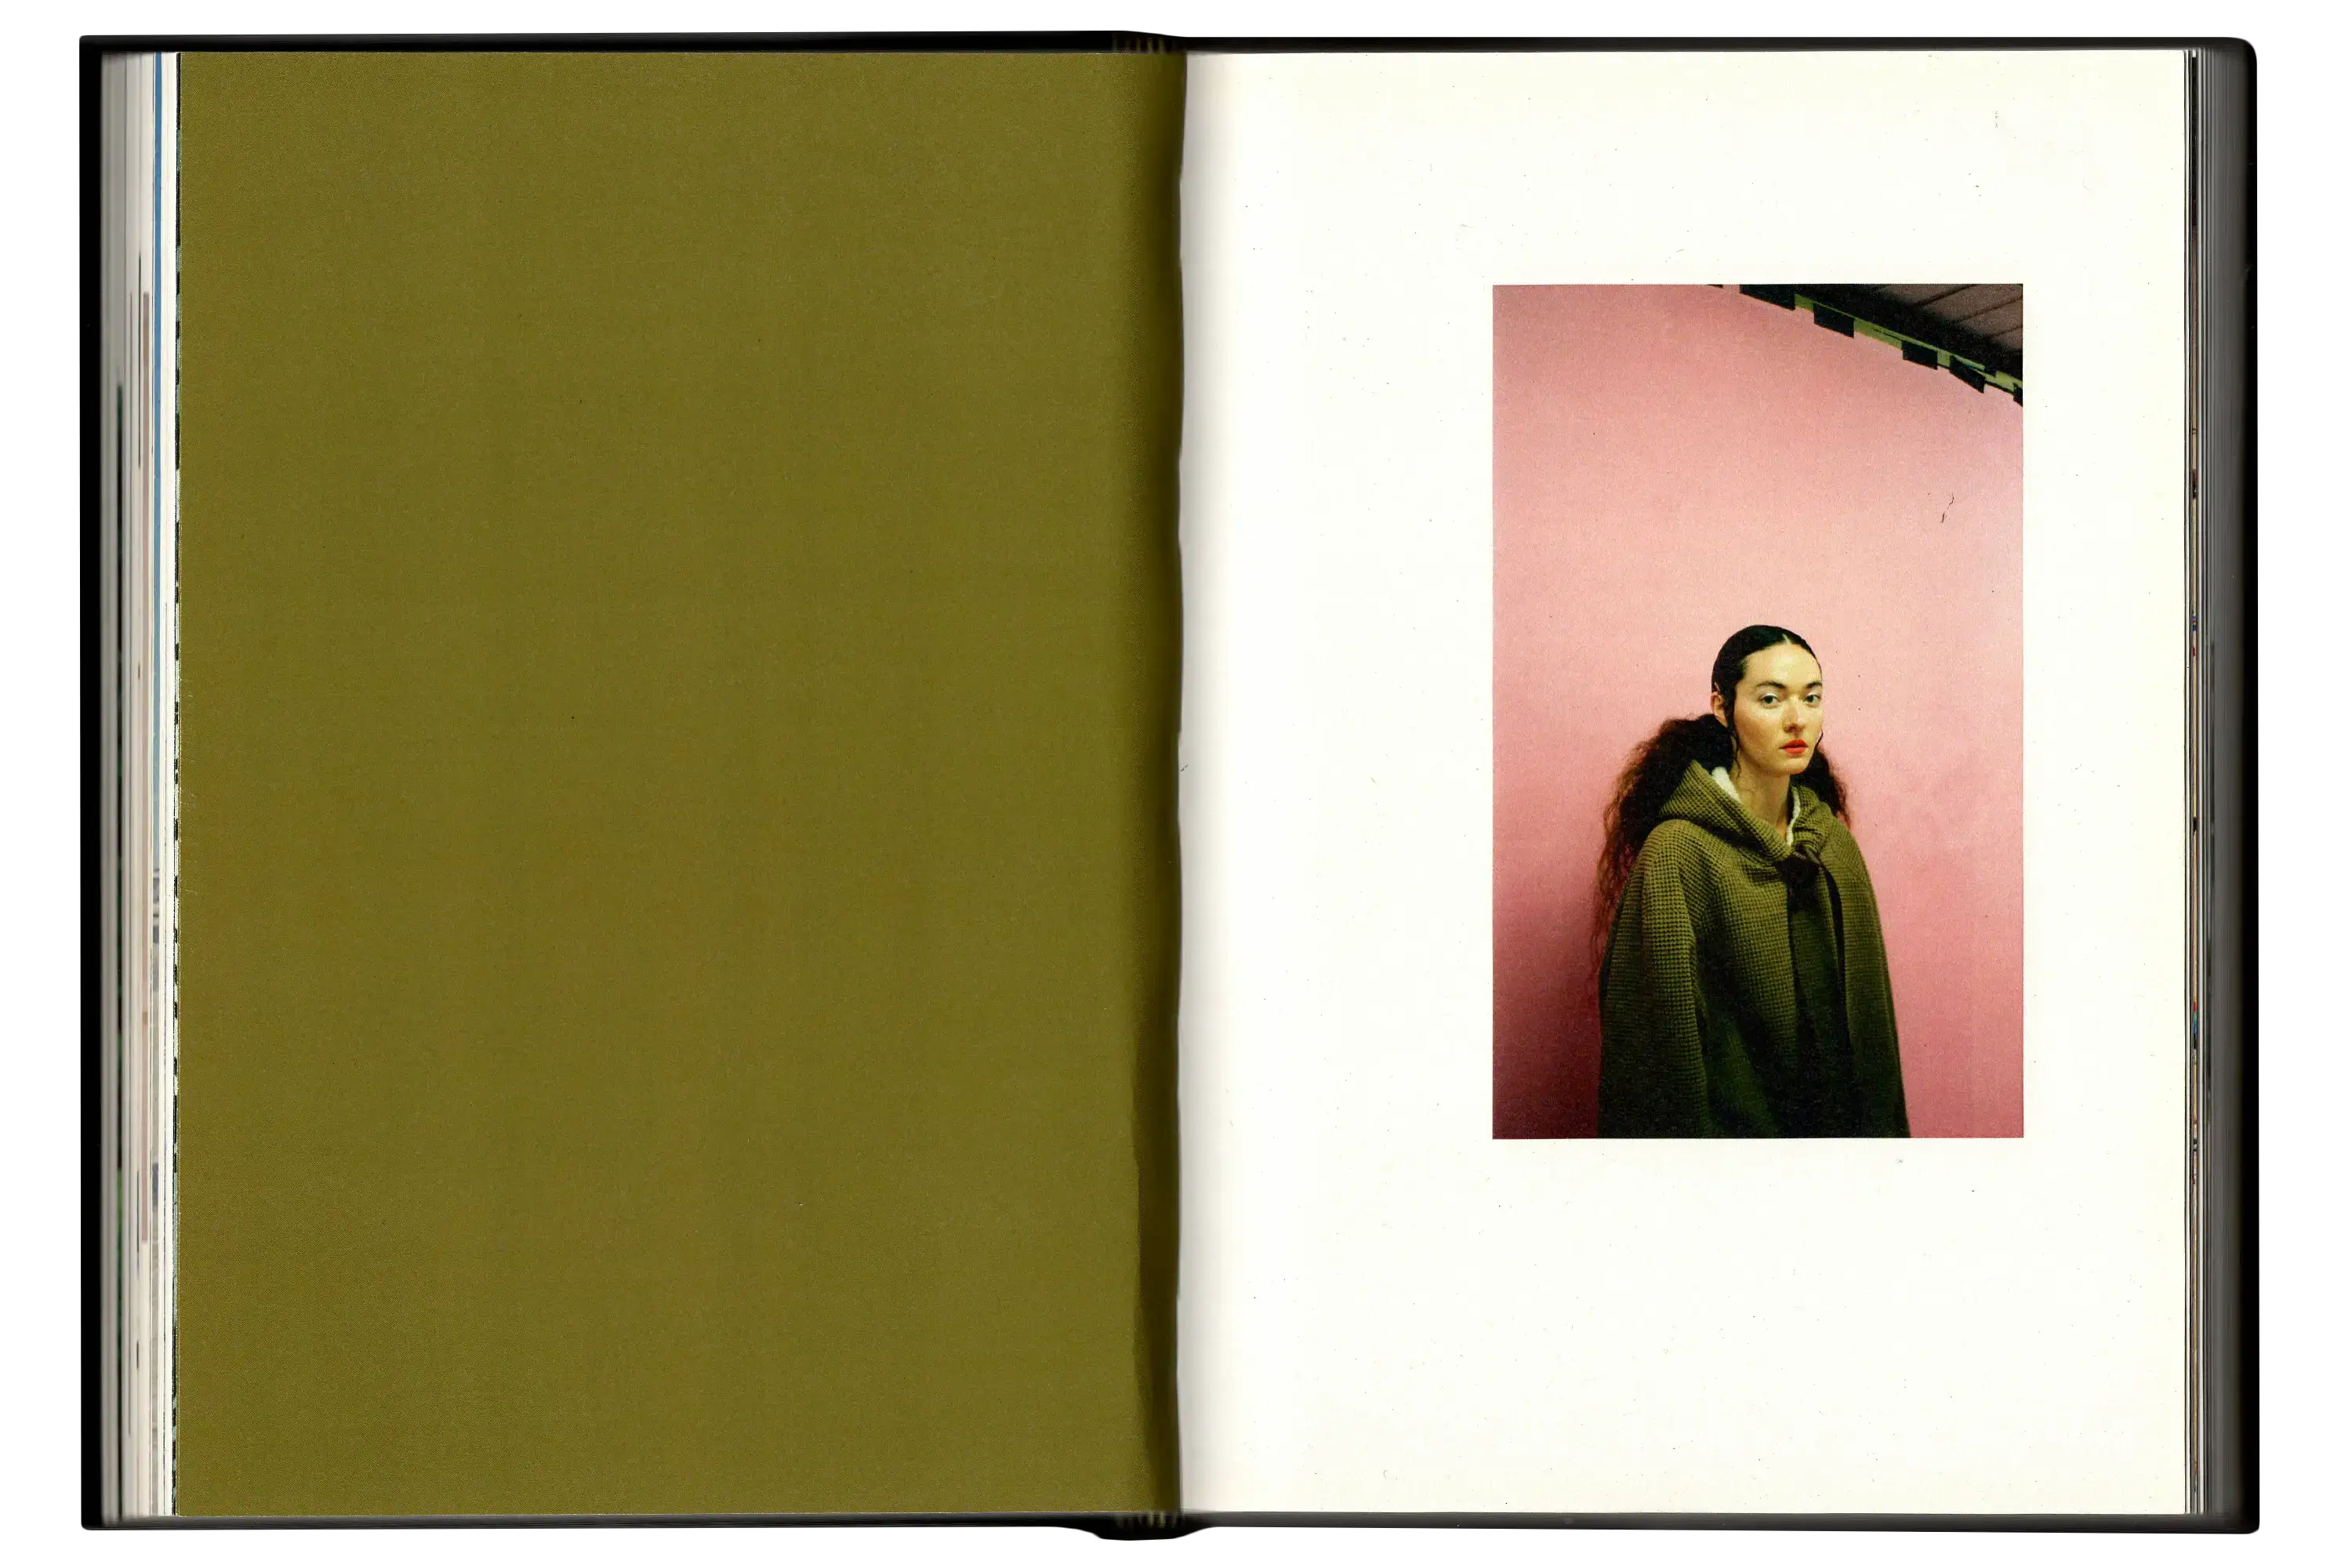 Imperfect Photo Book - left page deep brown/green colour, right page image of woman wearing similar colour coat in front of pink wall